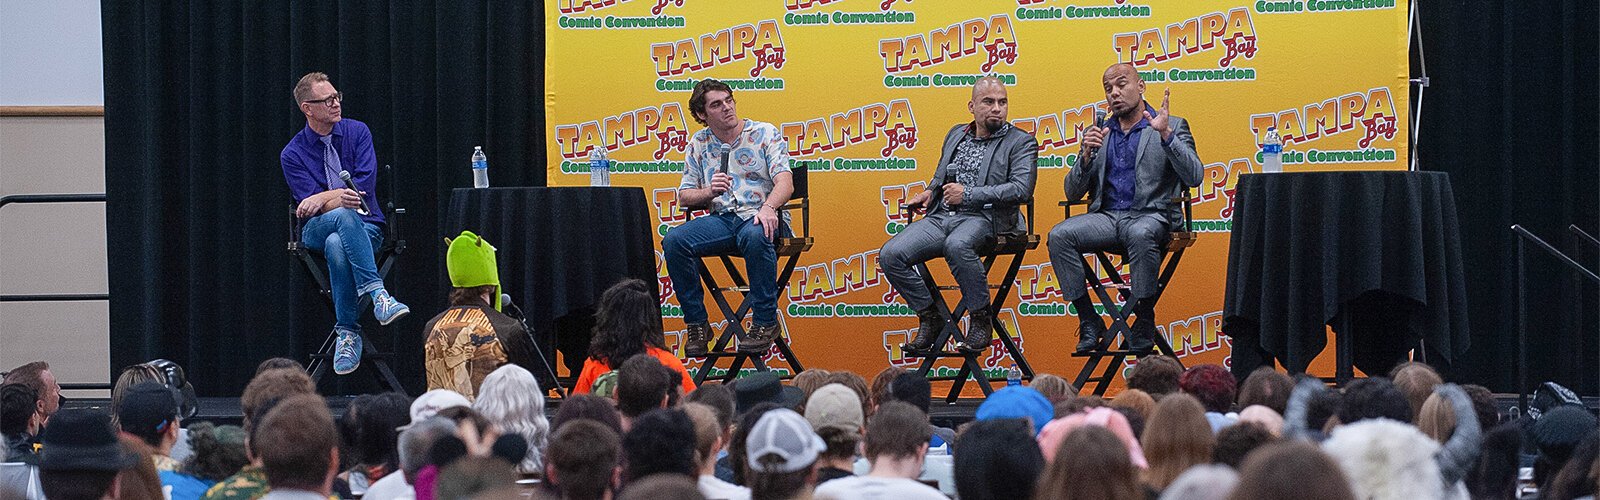 Some stars from the hit series “Breaking Bad” were on-hand for a q&a session at the Tampa Bay Comic Con. On stage are a moderator and actors RJ Mitte and Daniel and Luis Moncada.